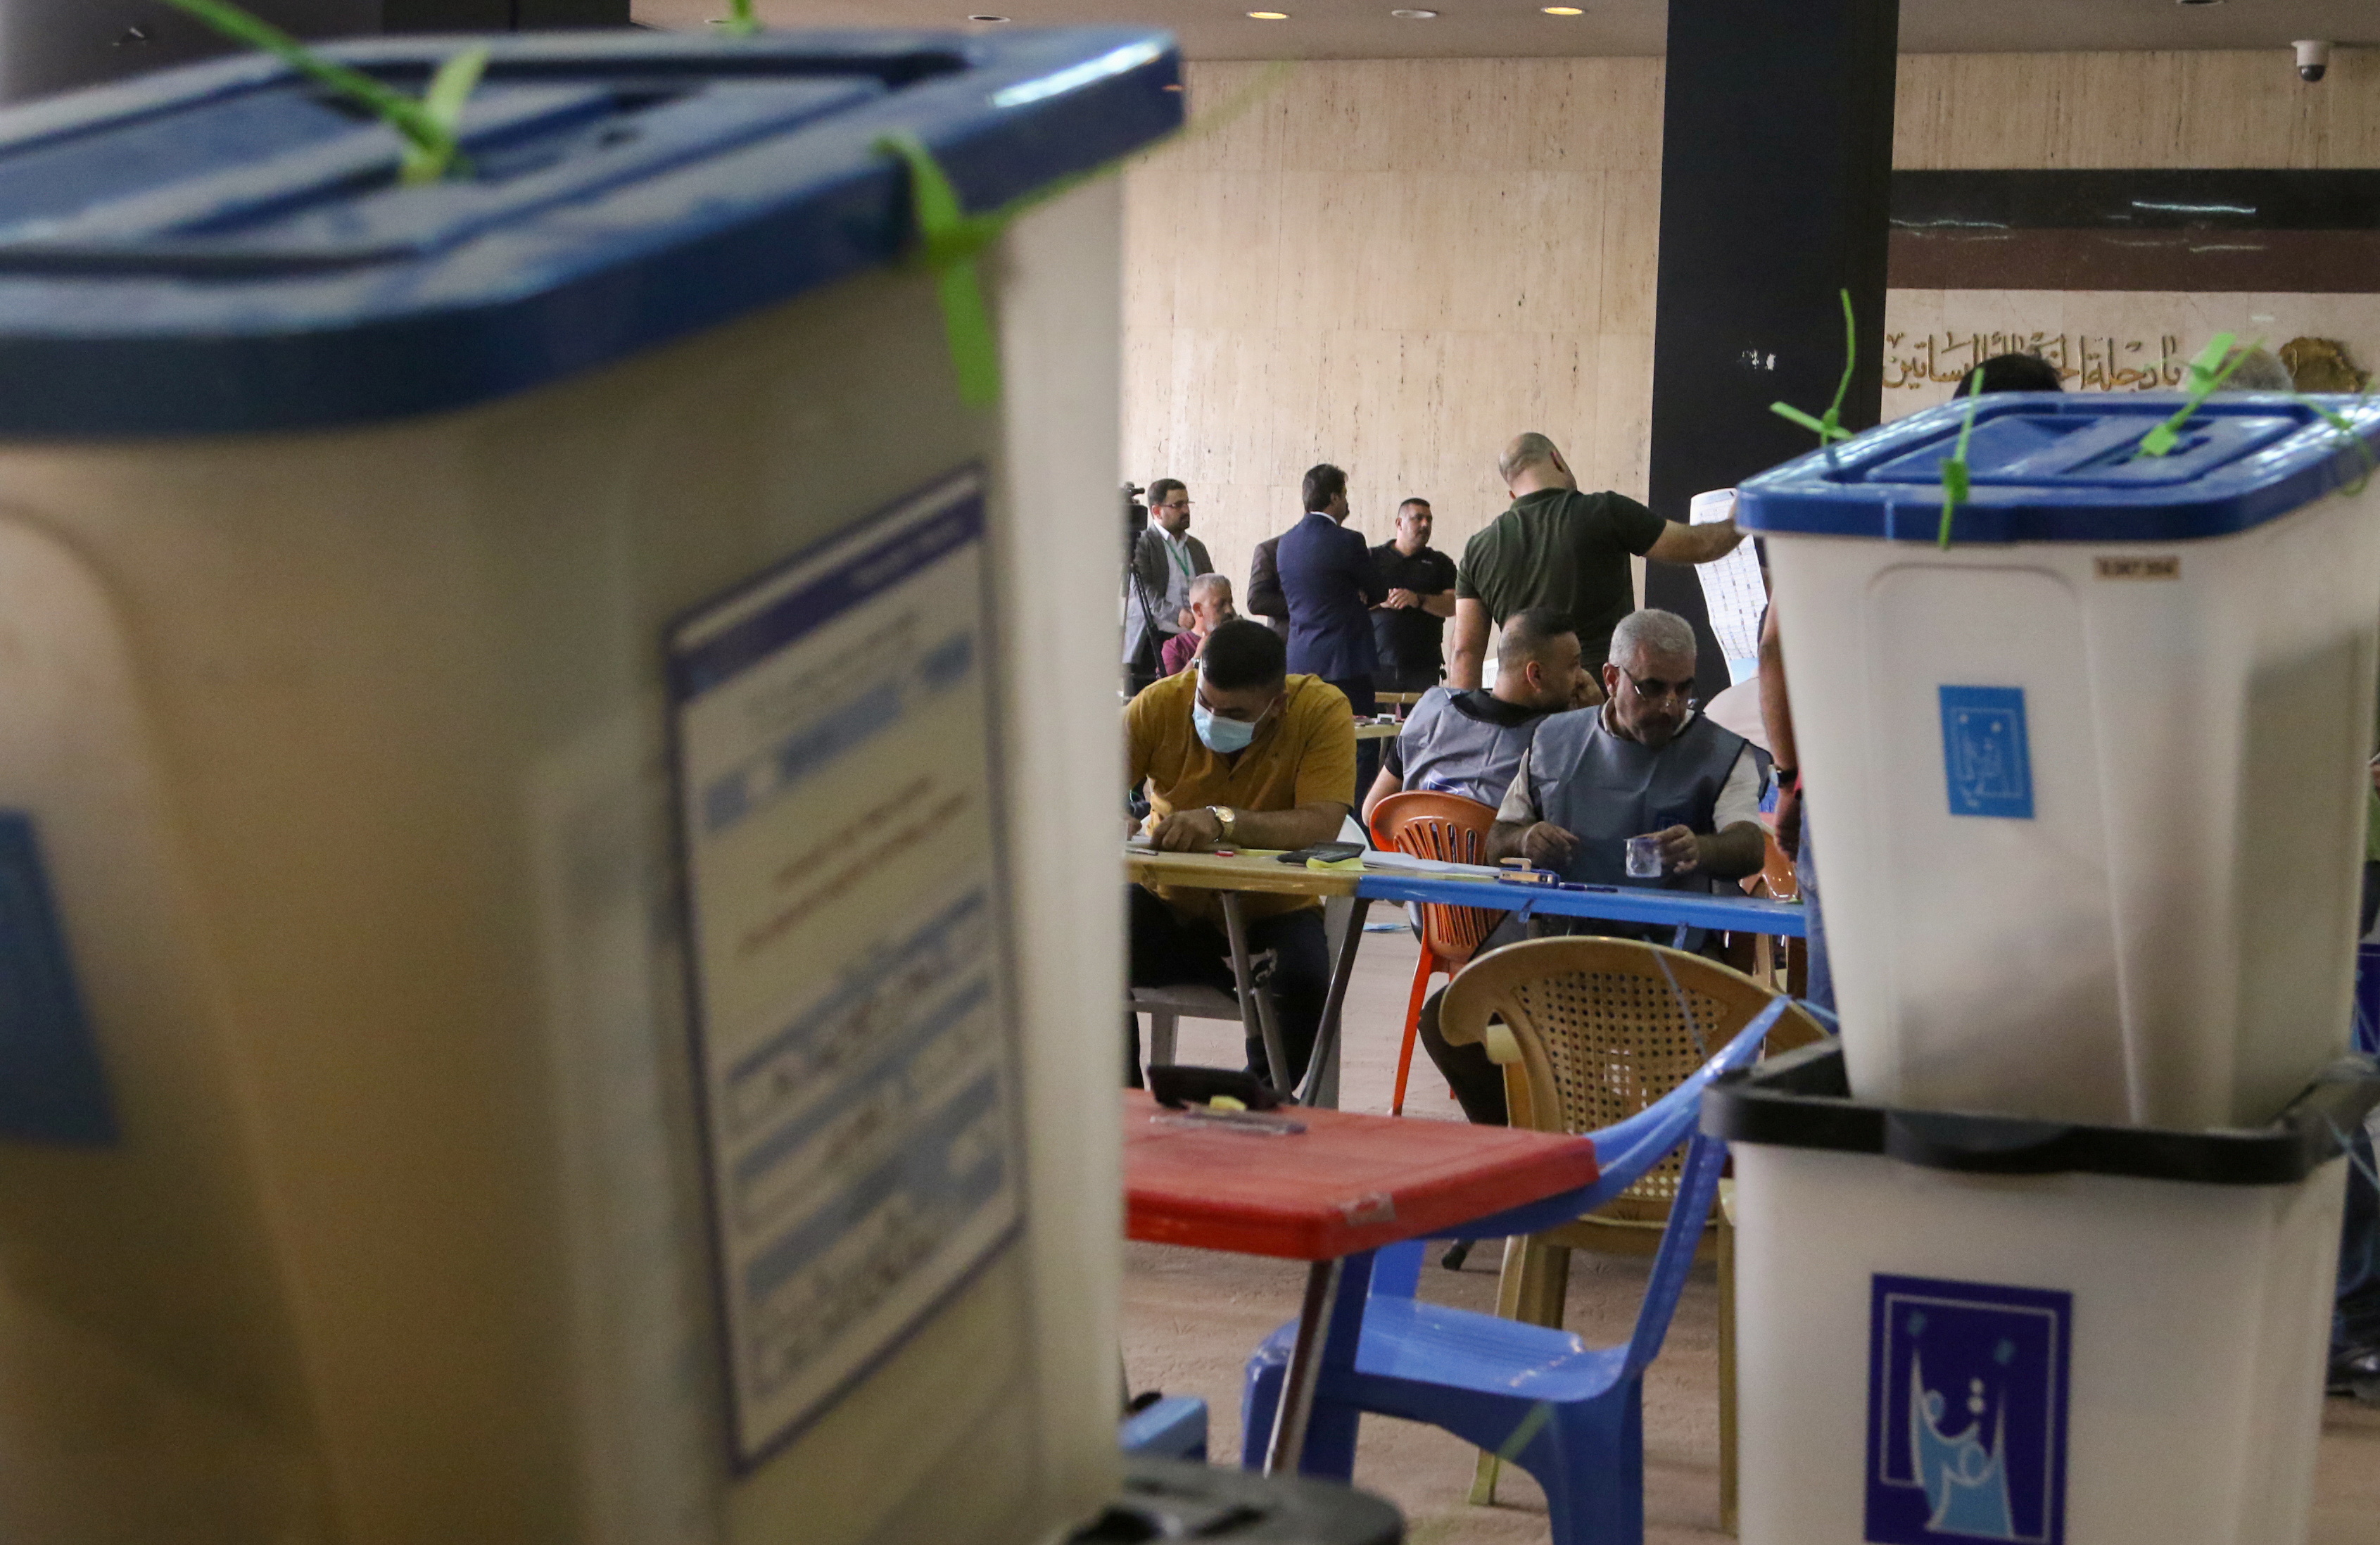 Employees of Iraq's Independent High Electoral Commission count votes at the Green Zone in Baghdad, Iraq, October 13, 2021. REUTERS/Ahmed Saad